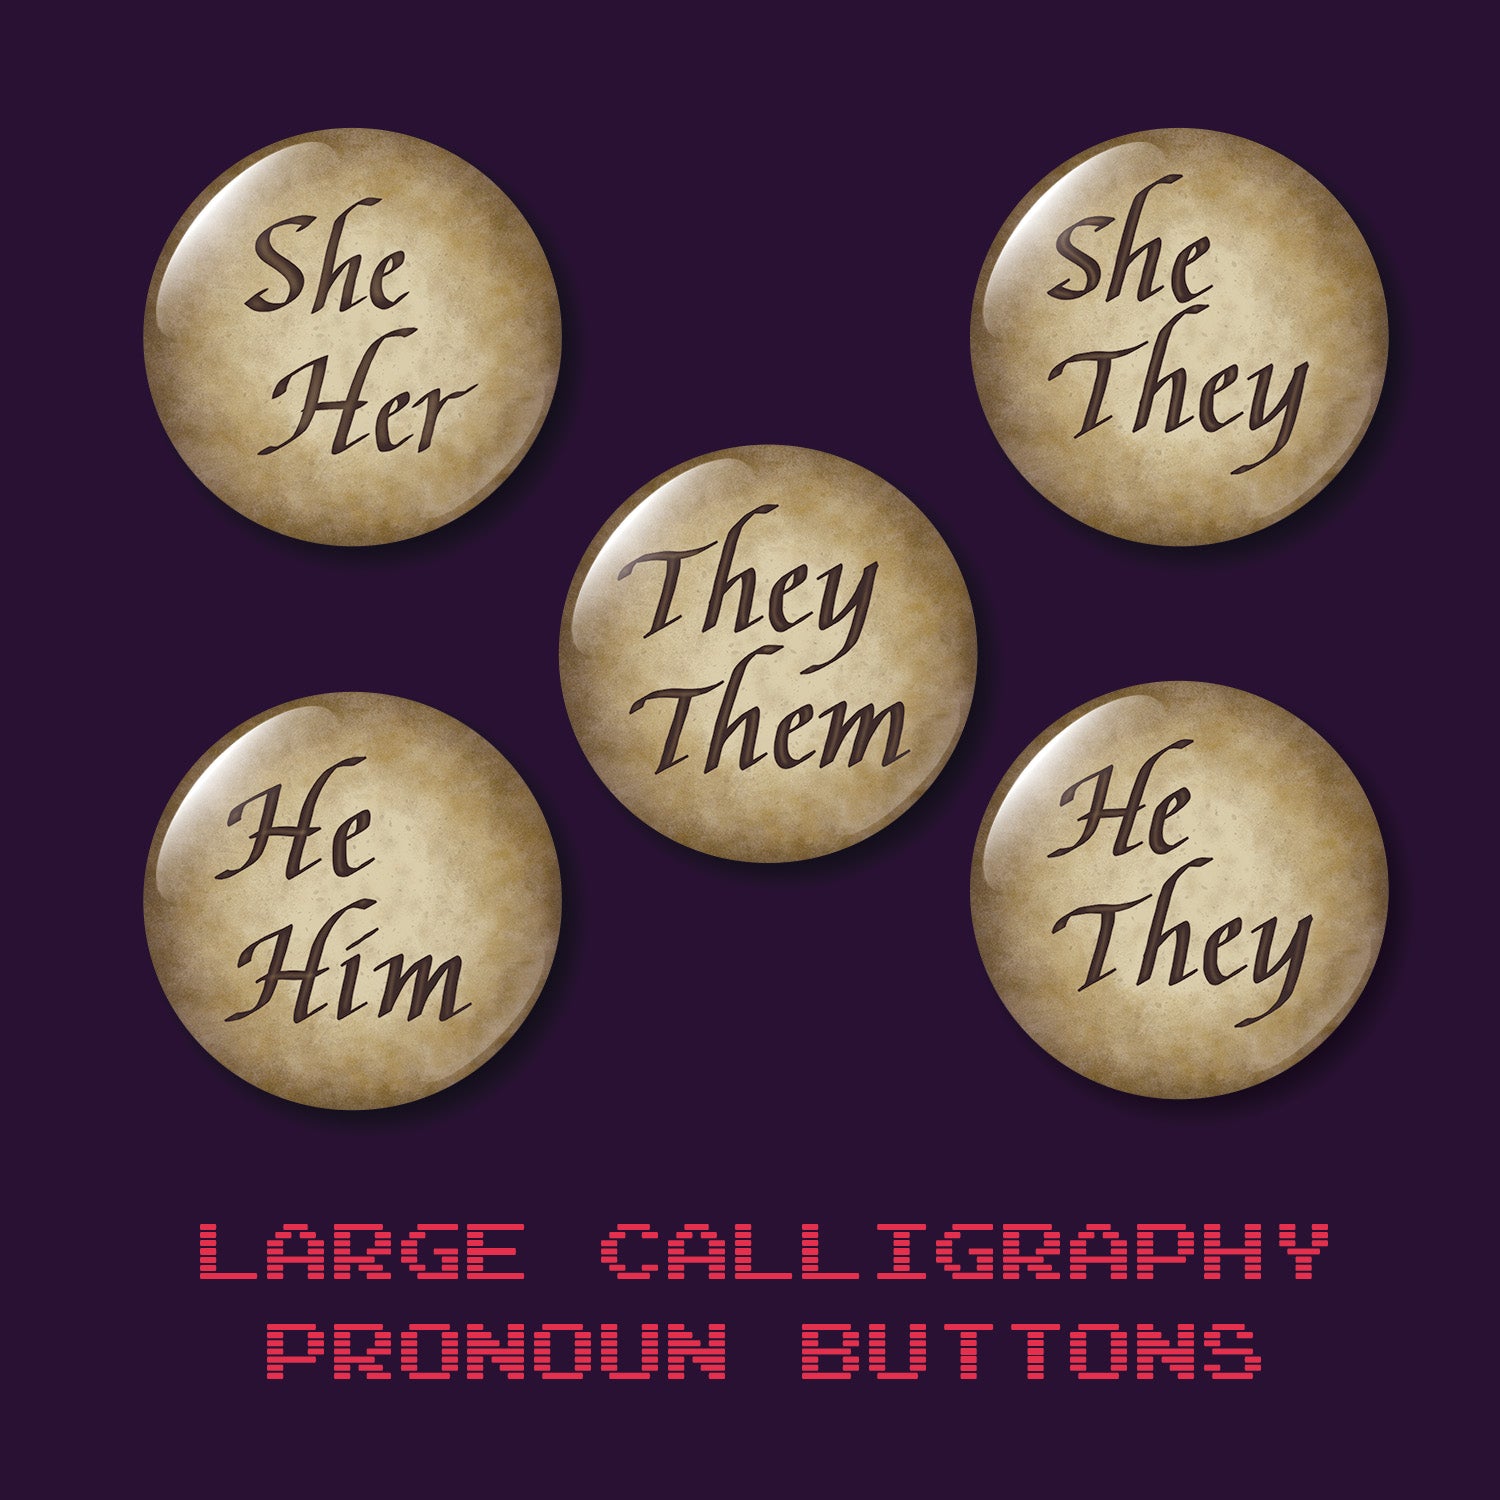 all the large calligraphy pronoun buttons on one page with a dark purple background